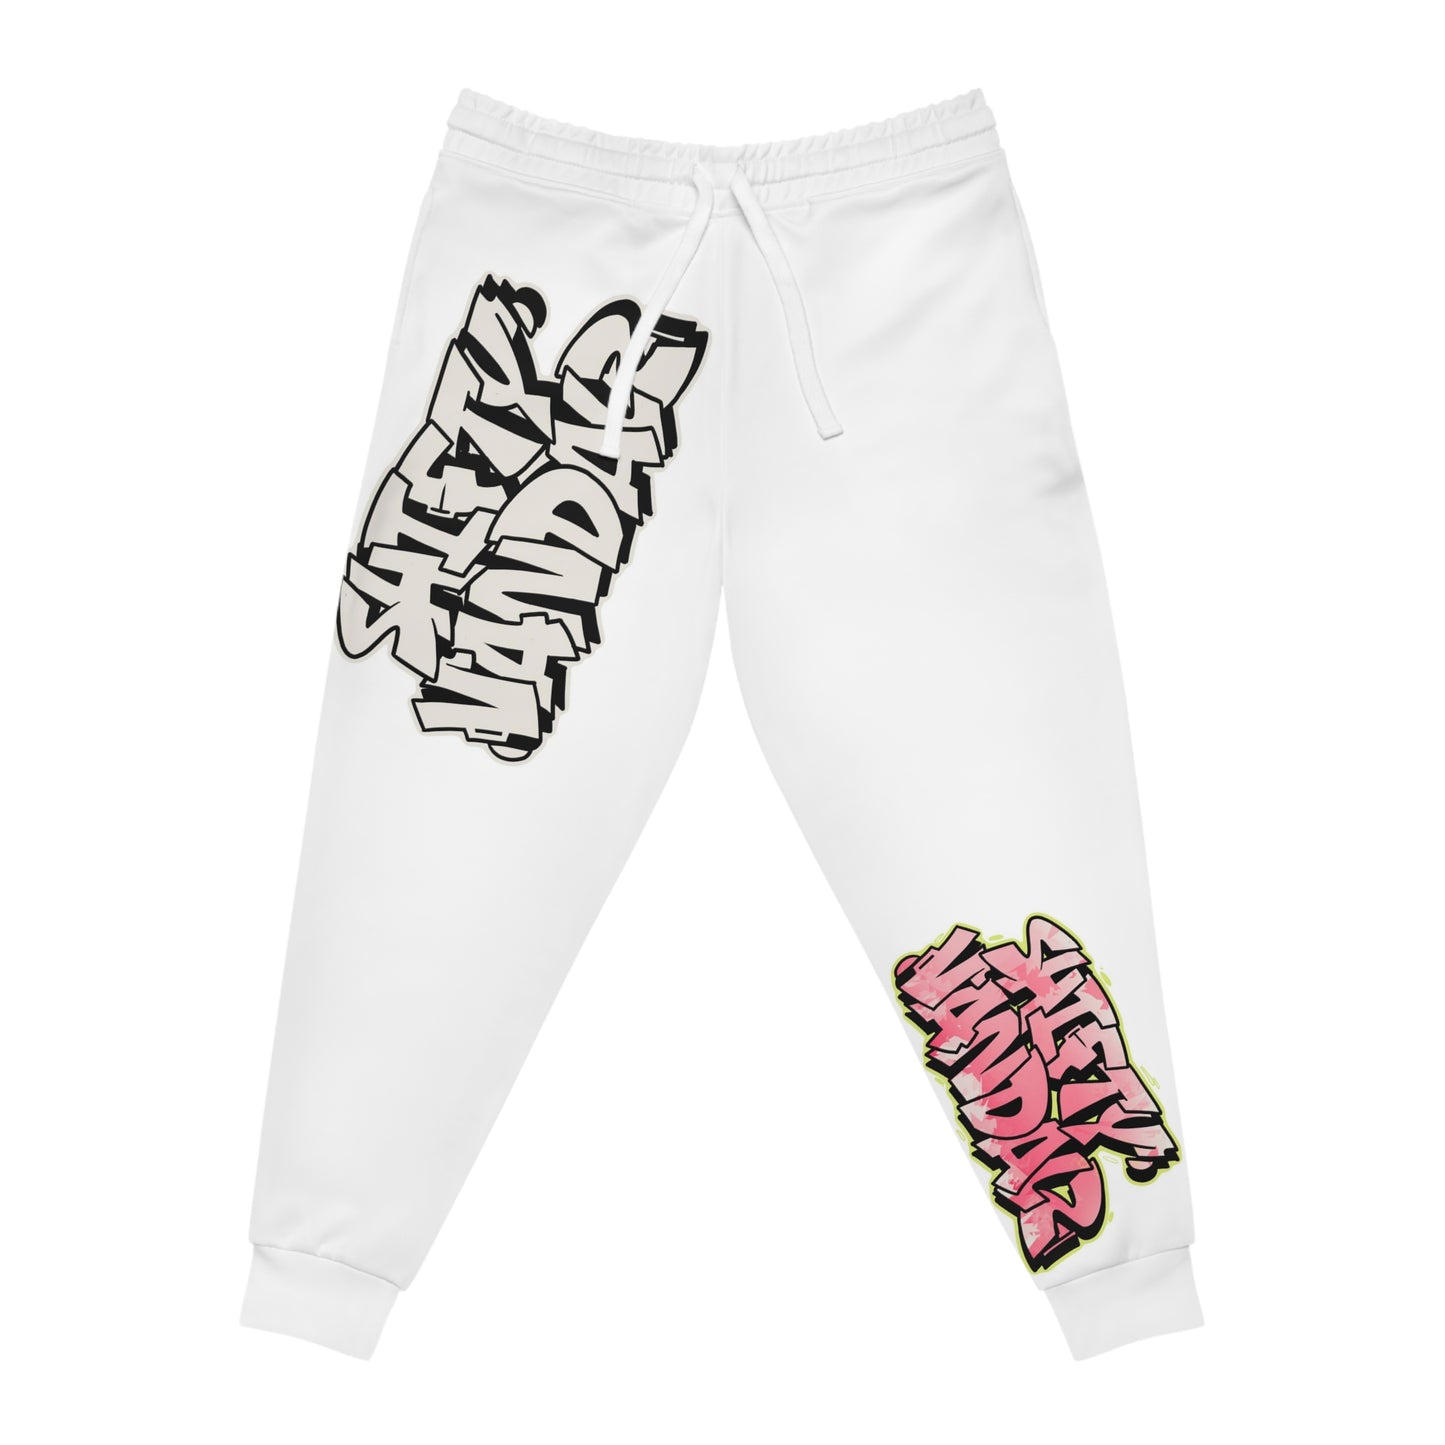 Official shiftyvandalz Joggers(Images switched)